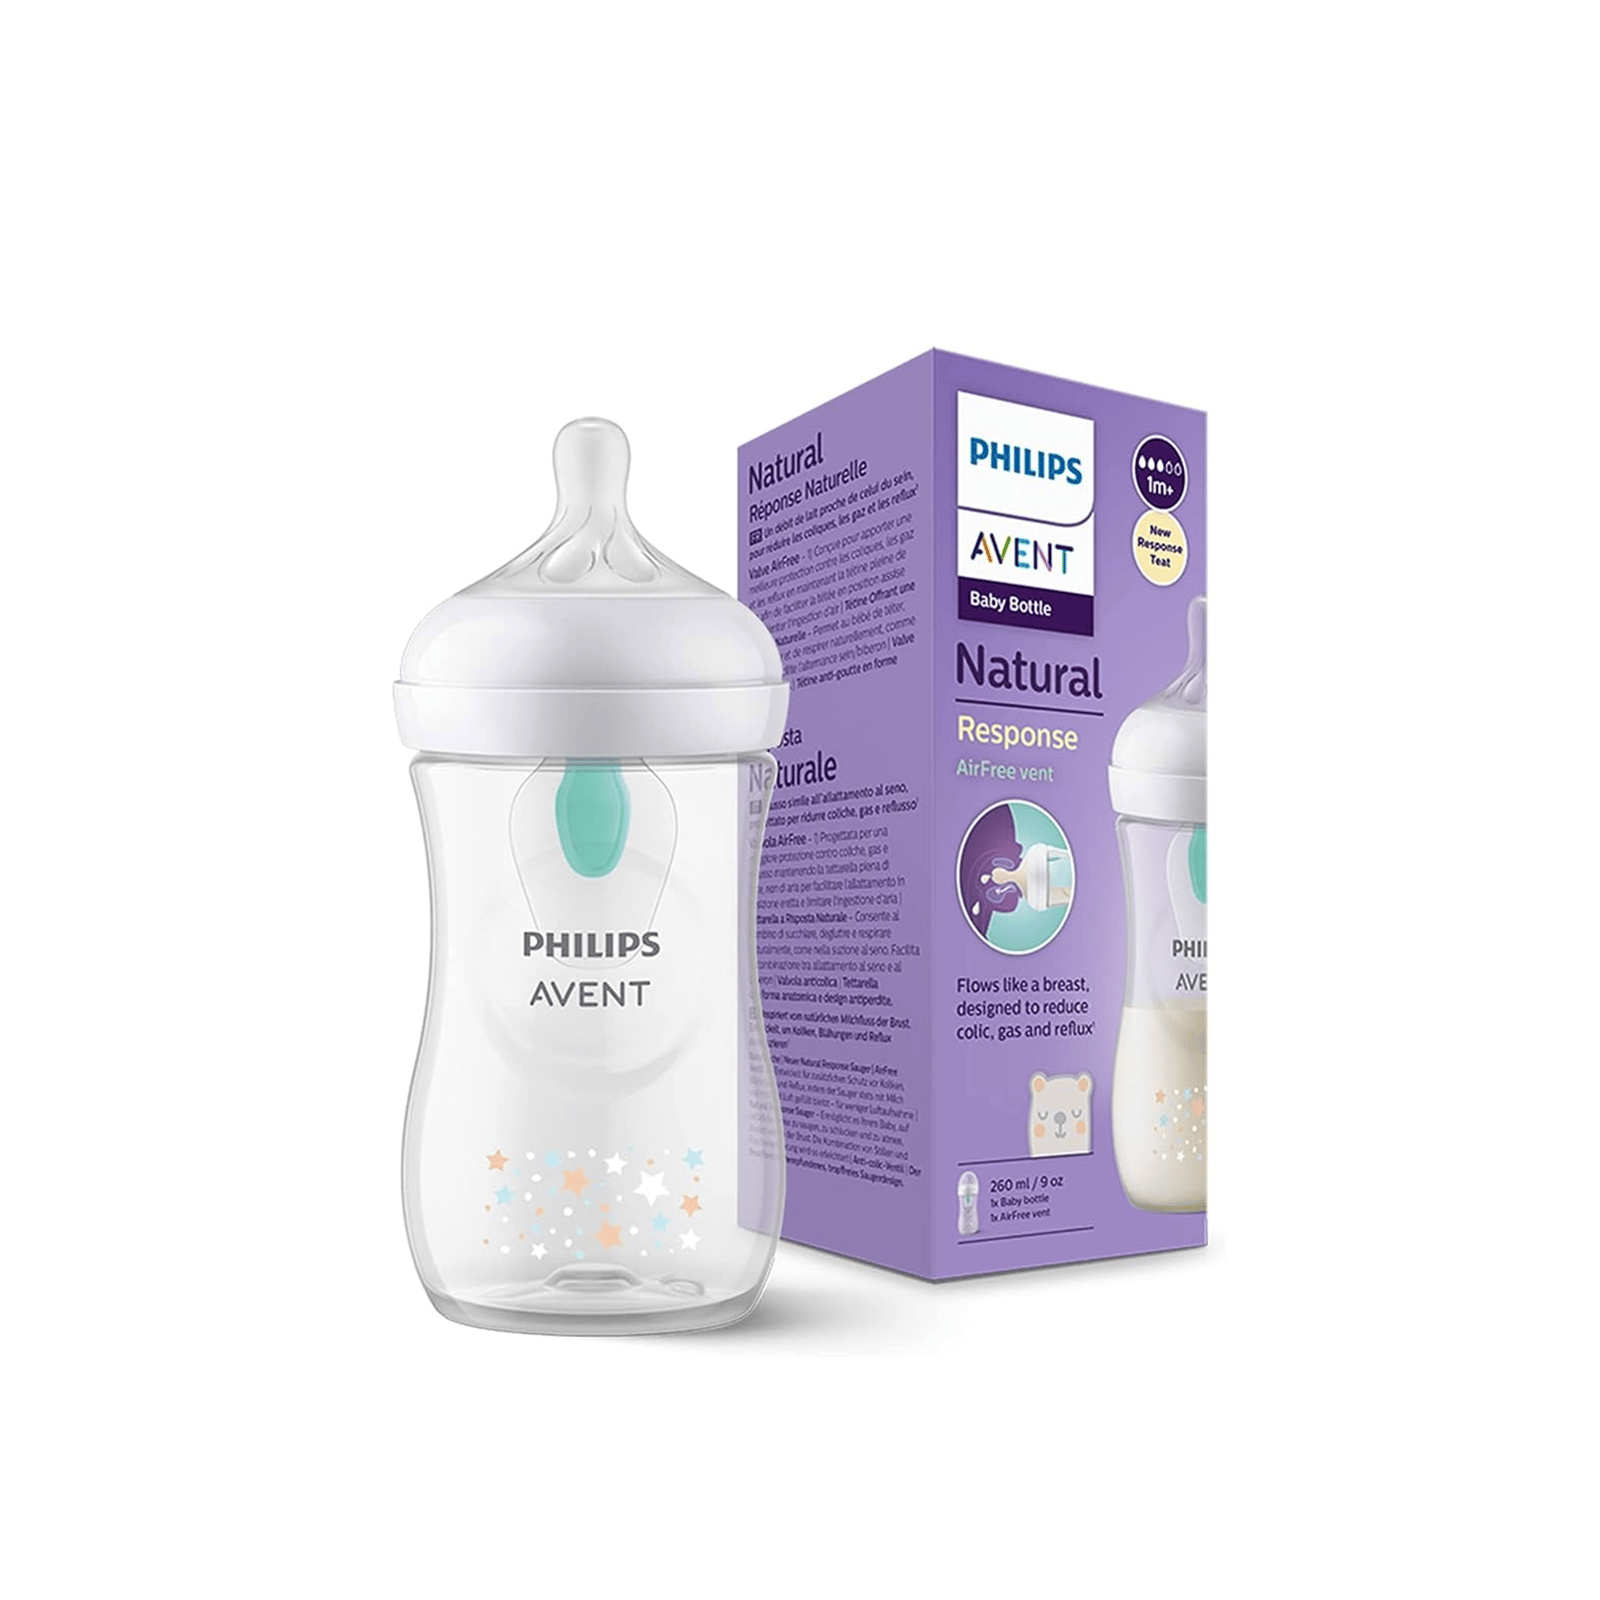 Philips Avent Natural Response AirFree Vent Baby Bottle 1m+ Bear 260ml (9 oz)